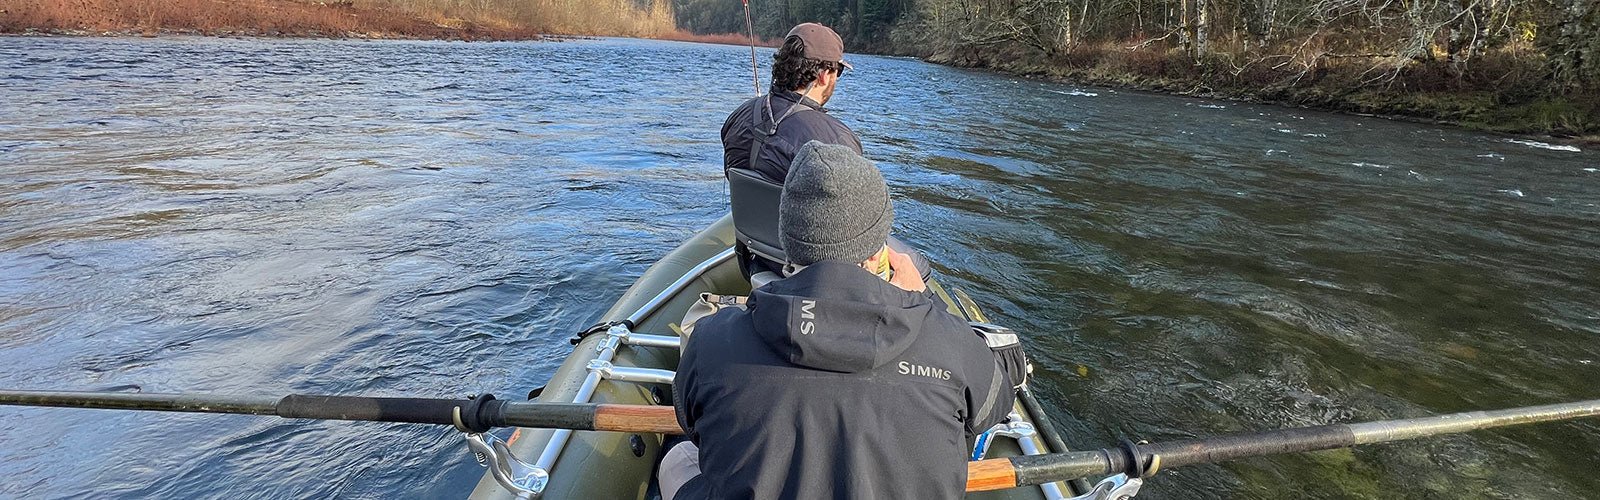 January fishing preview for the pacific northwest - Next Adventure